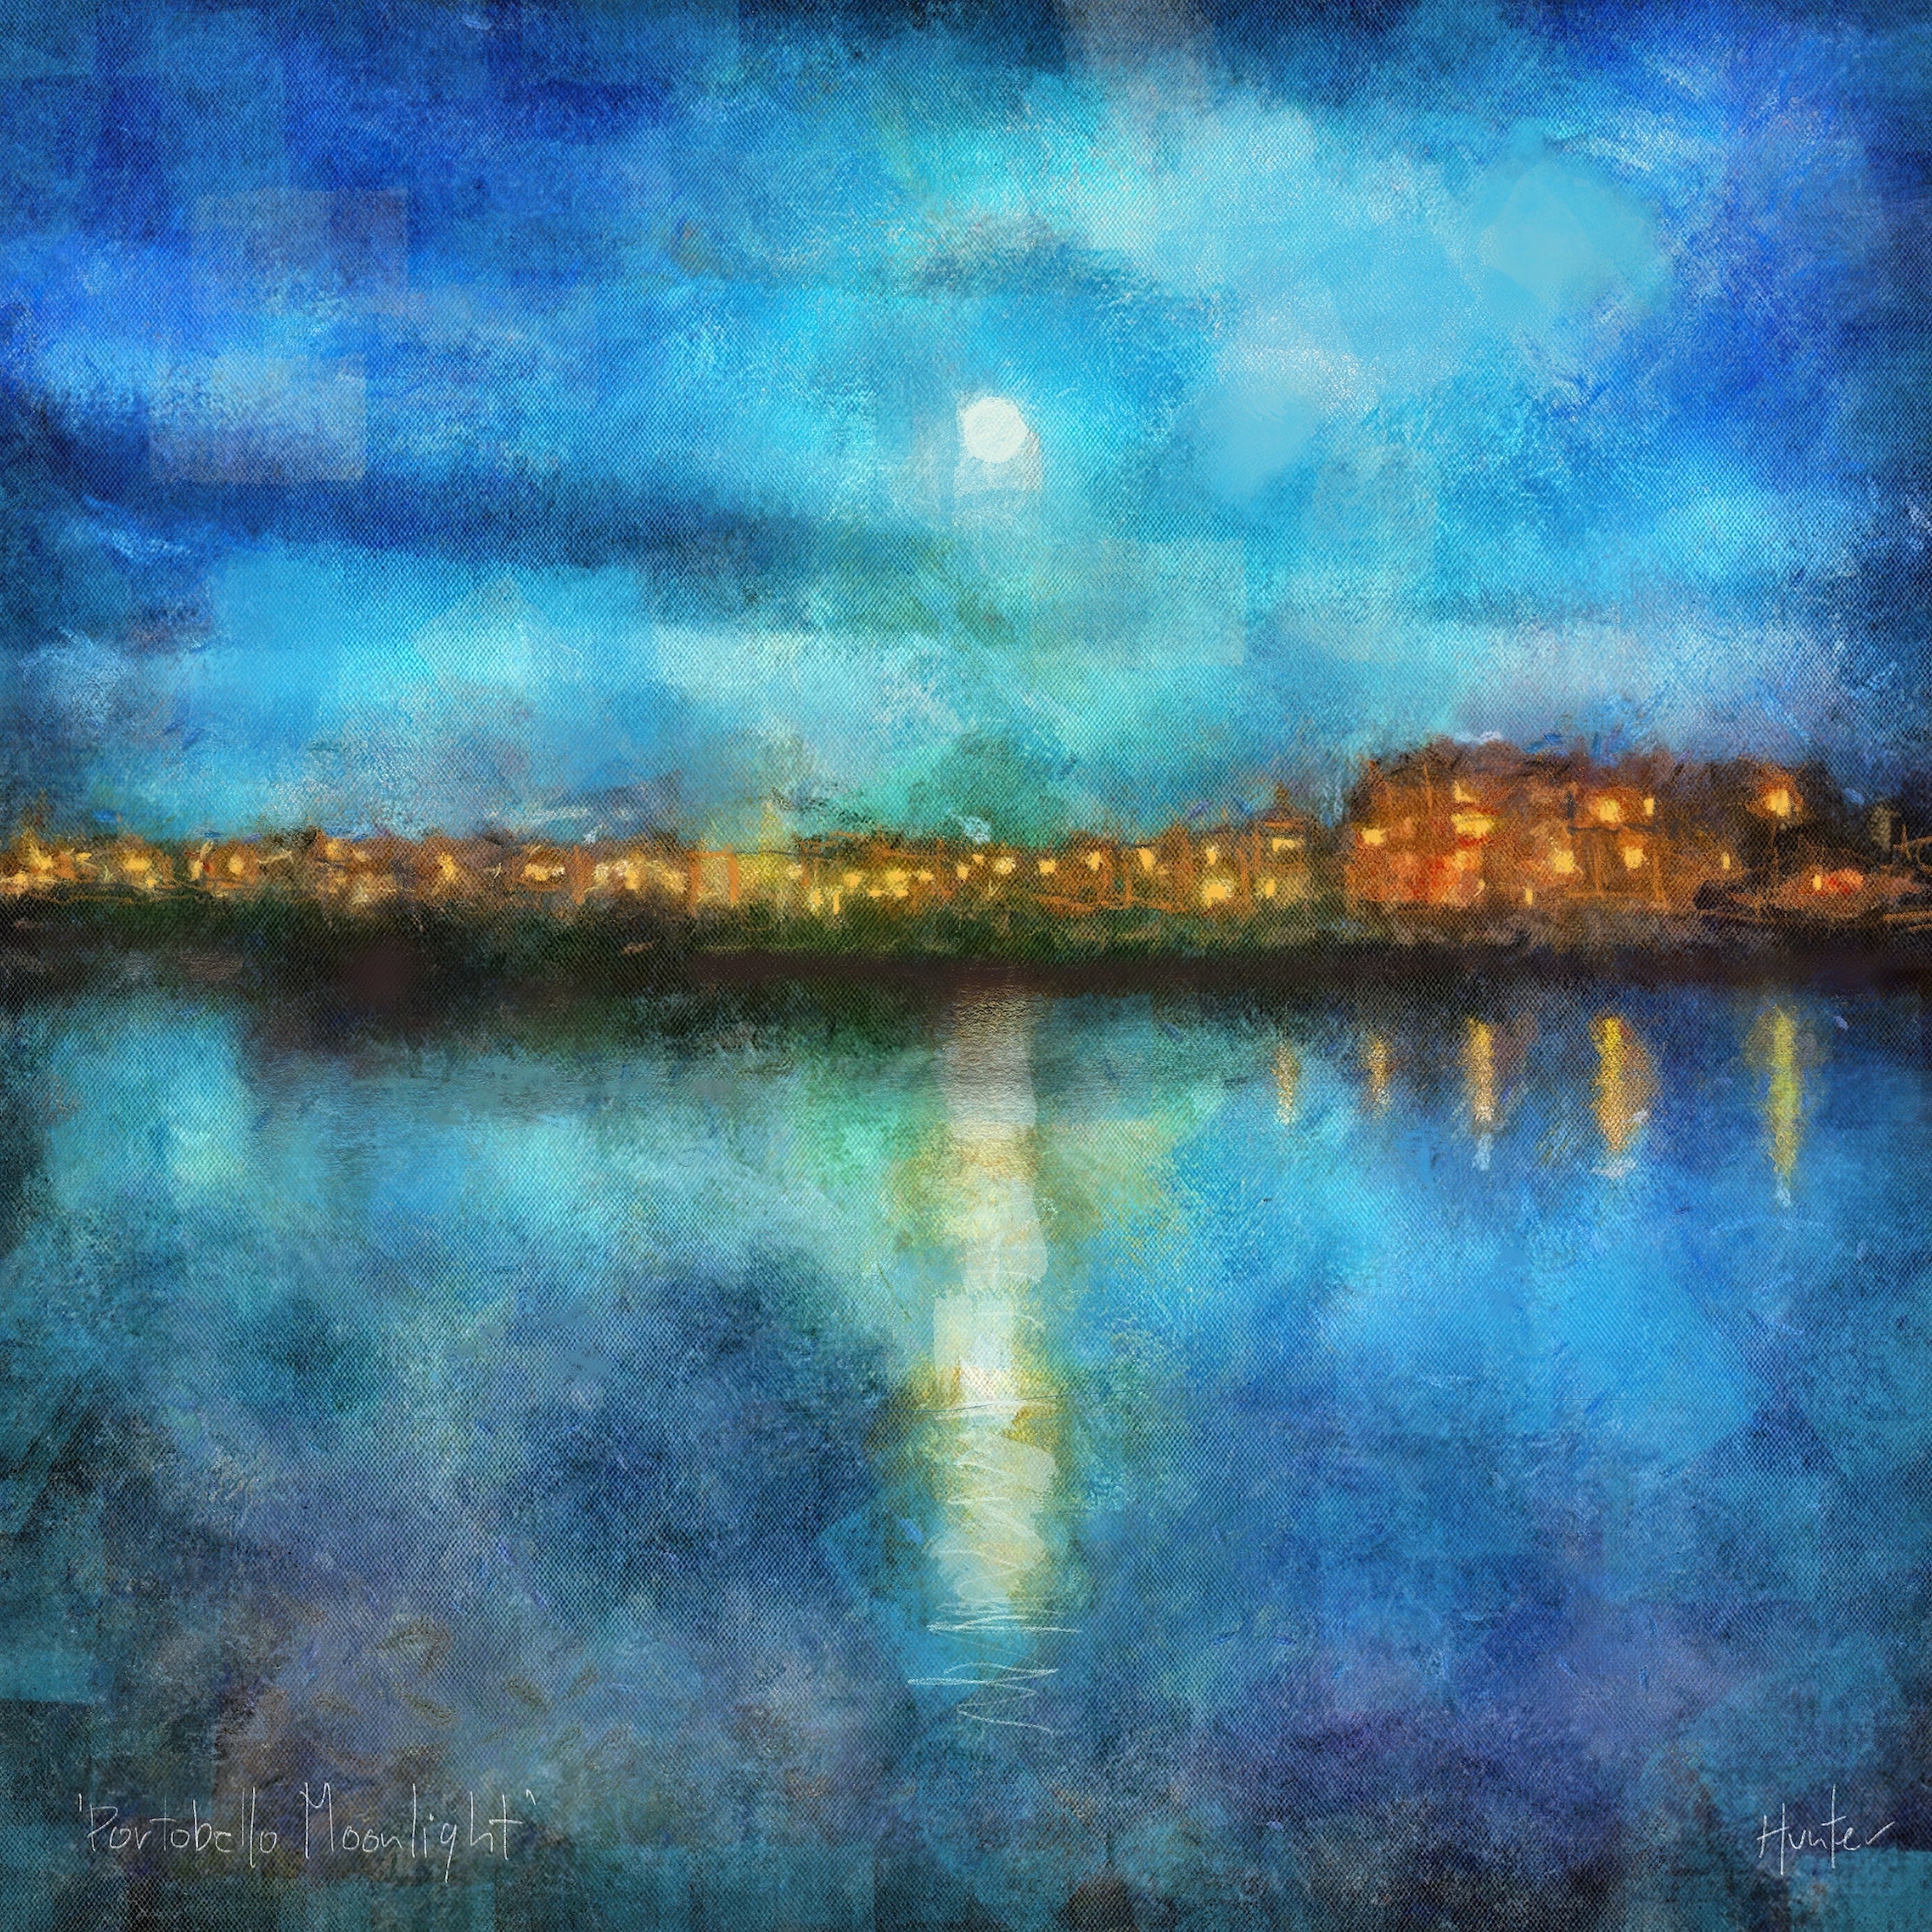 Portobello Moonlight | Scotland In Your Pocket Art Print-Scotland In Your Pocket Framed Prints-Edinburgh & Glasgow Art Gallery-Mounted & Cello Bag: 12.5x12.5 cm-Black Frame-Paintings, Prints, Homeware, Art Gifts From Scotland By Scottish Artist Kevin Hunter